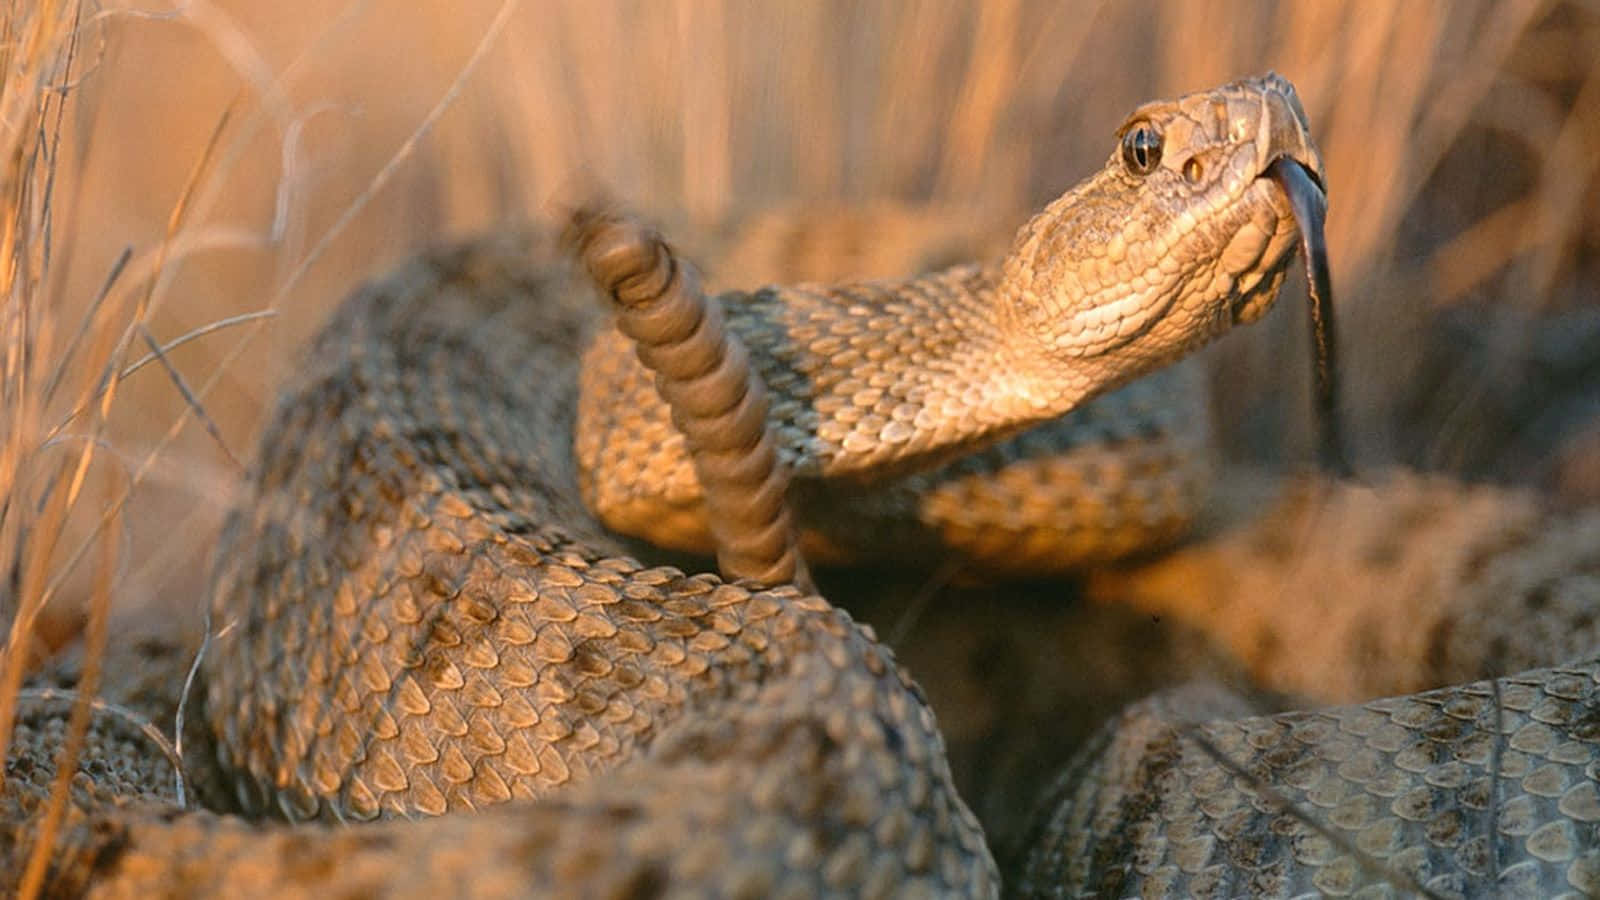 A rattlesnake coiled and ready to strike